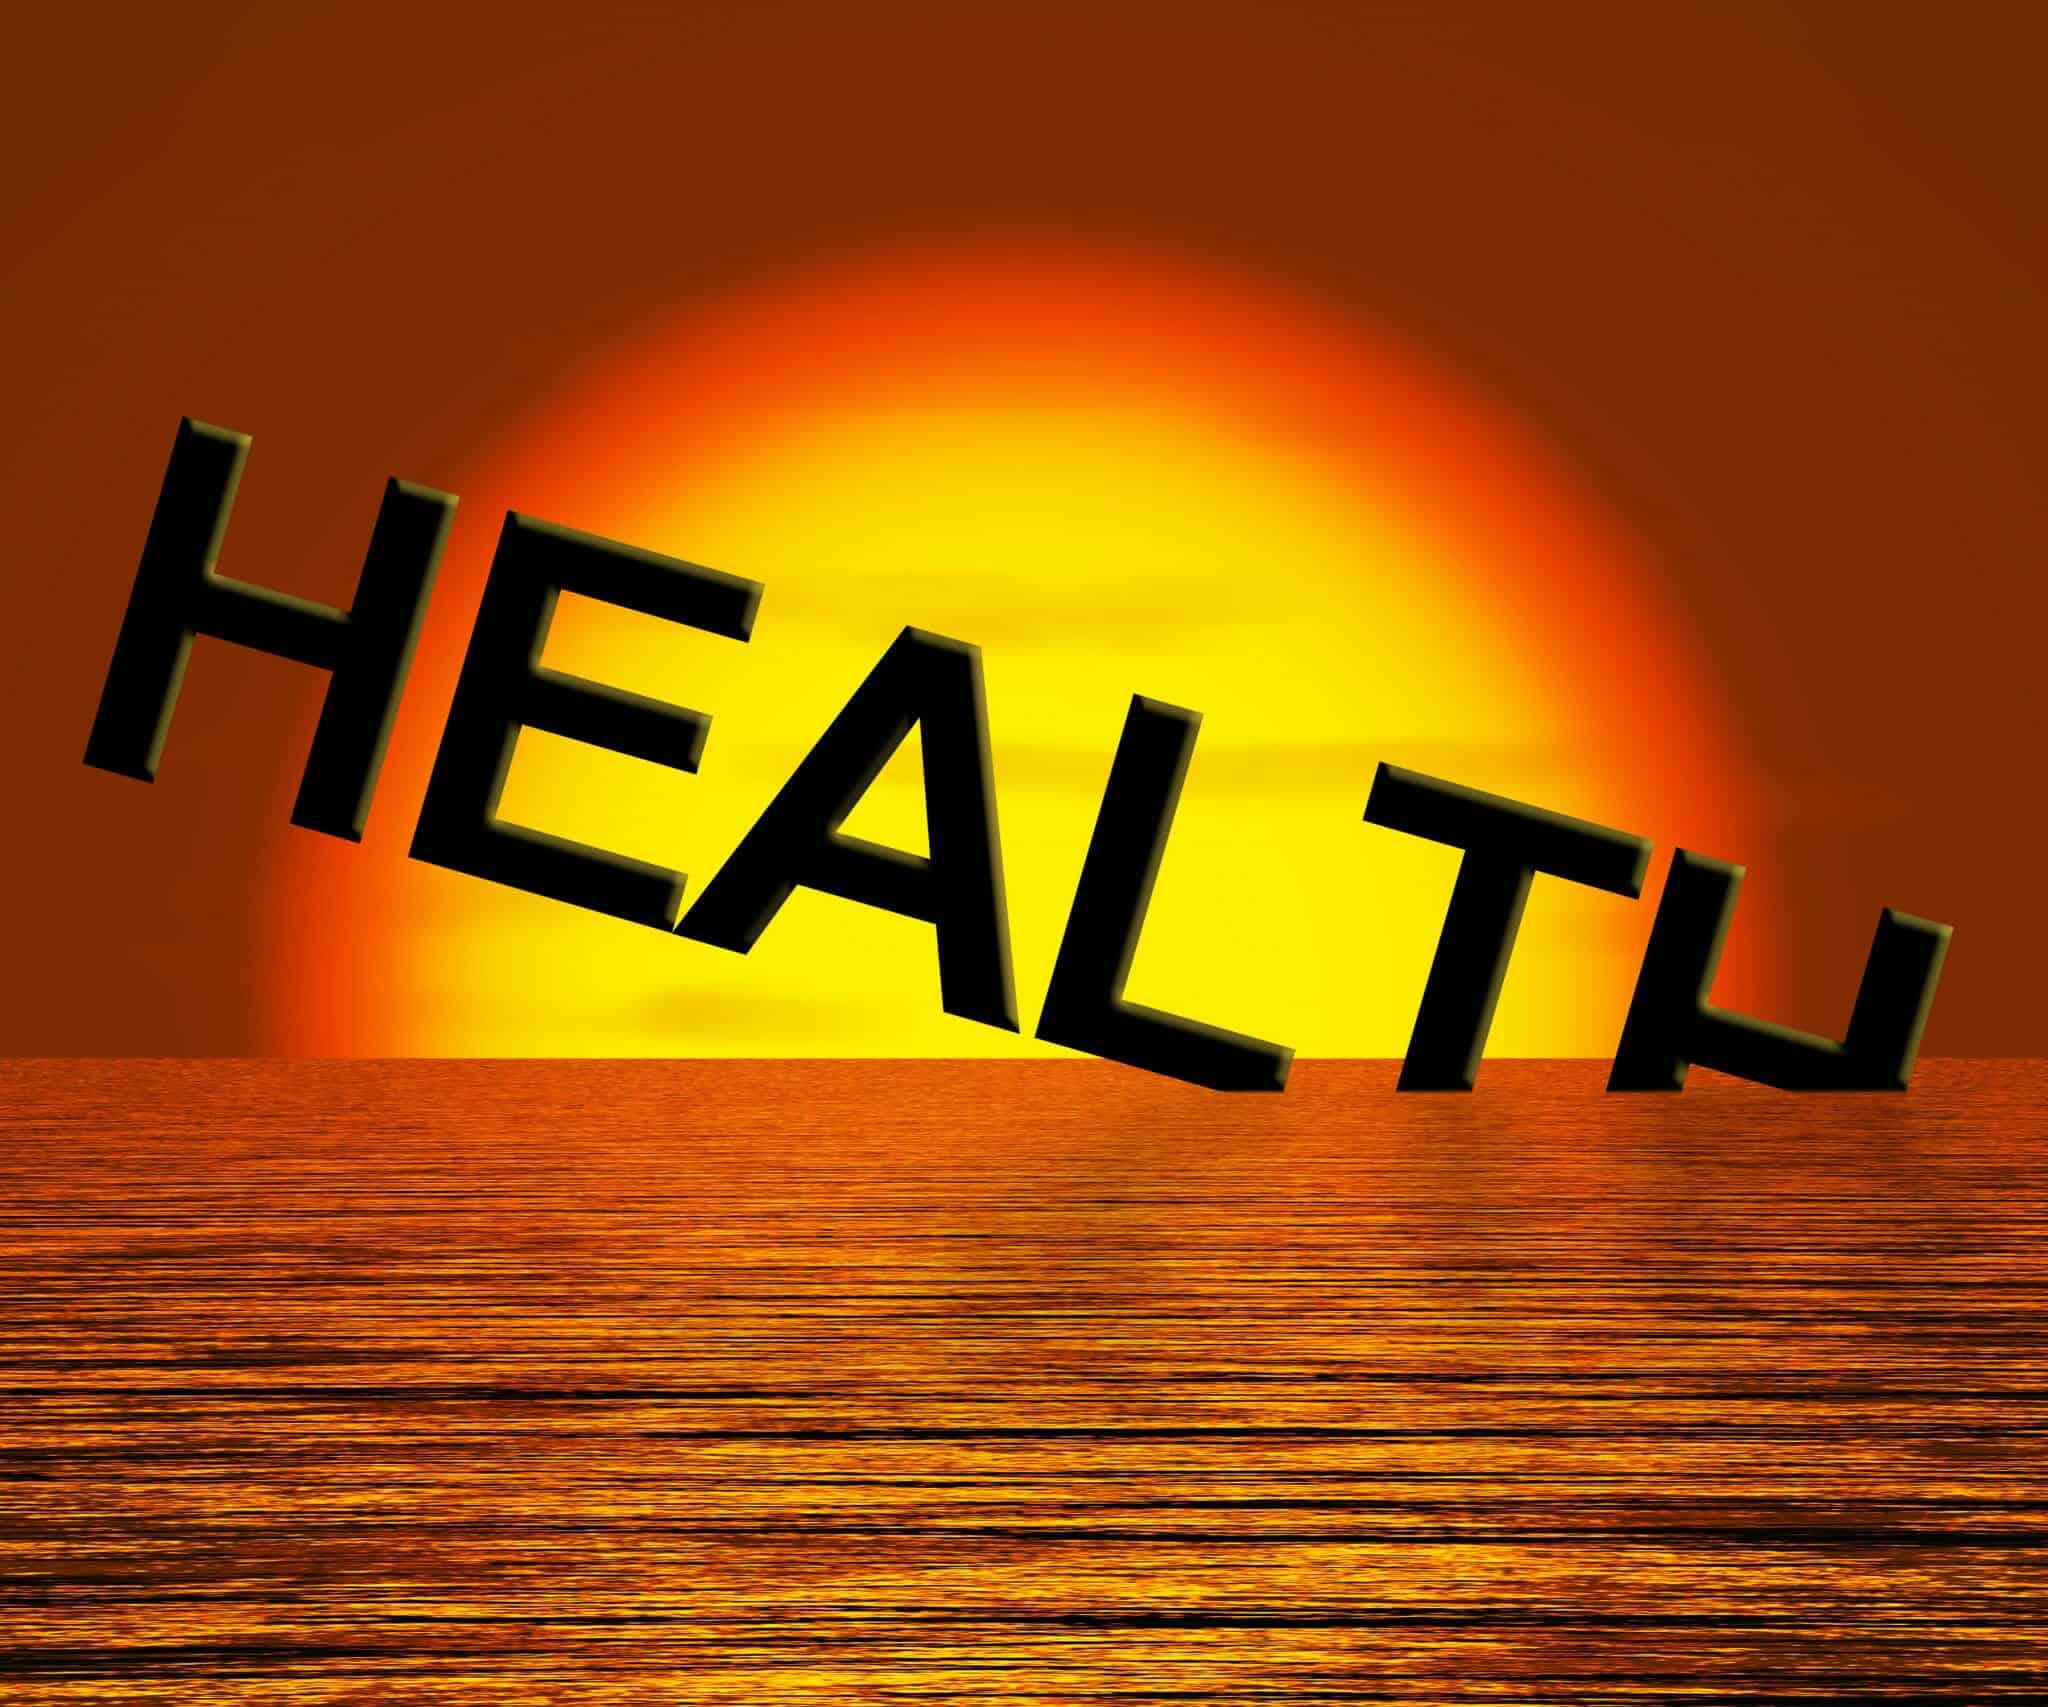 The word "Health" going down into the ocean in the sunset signifying declining health